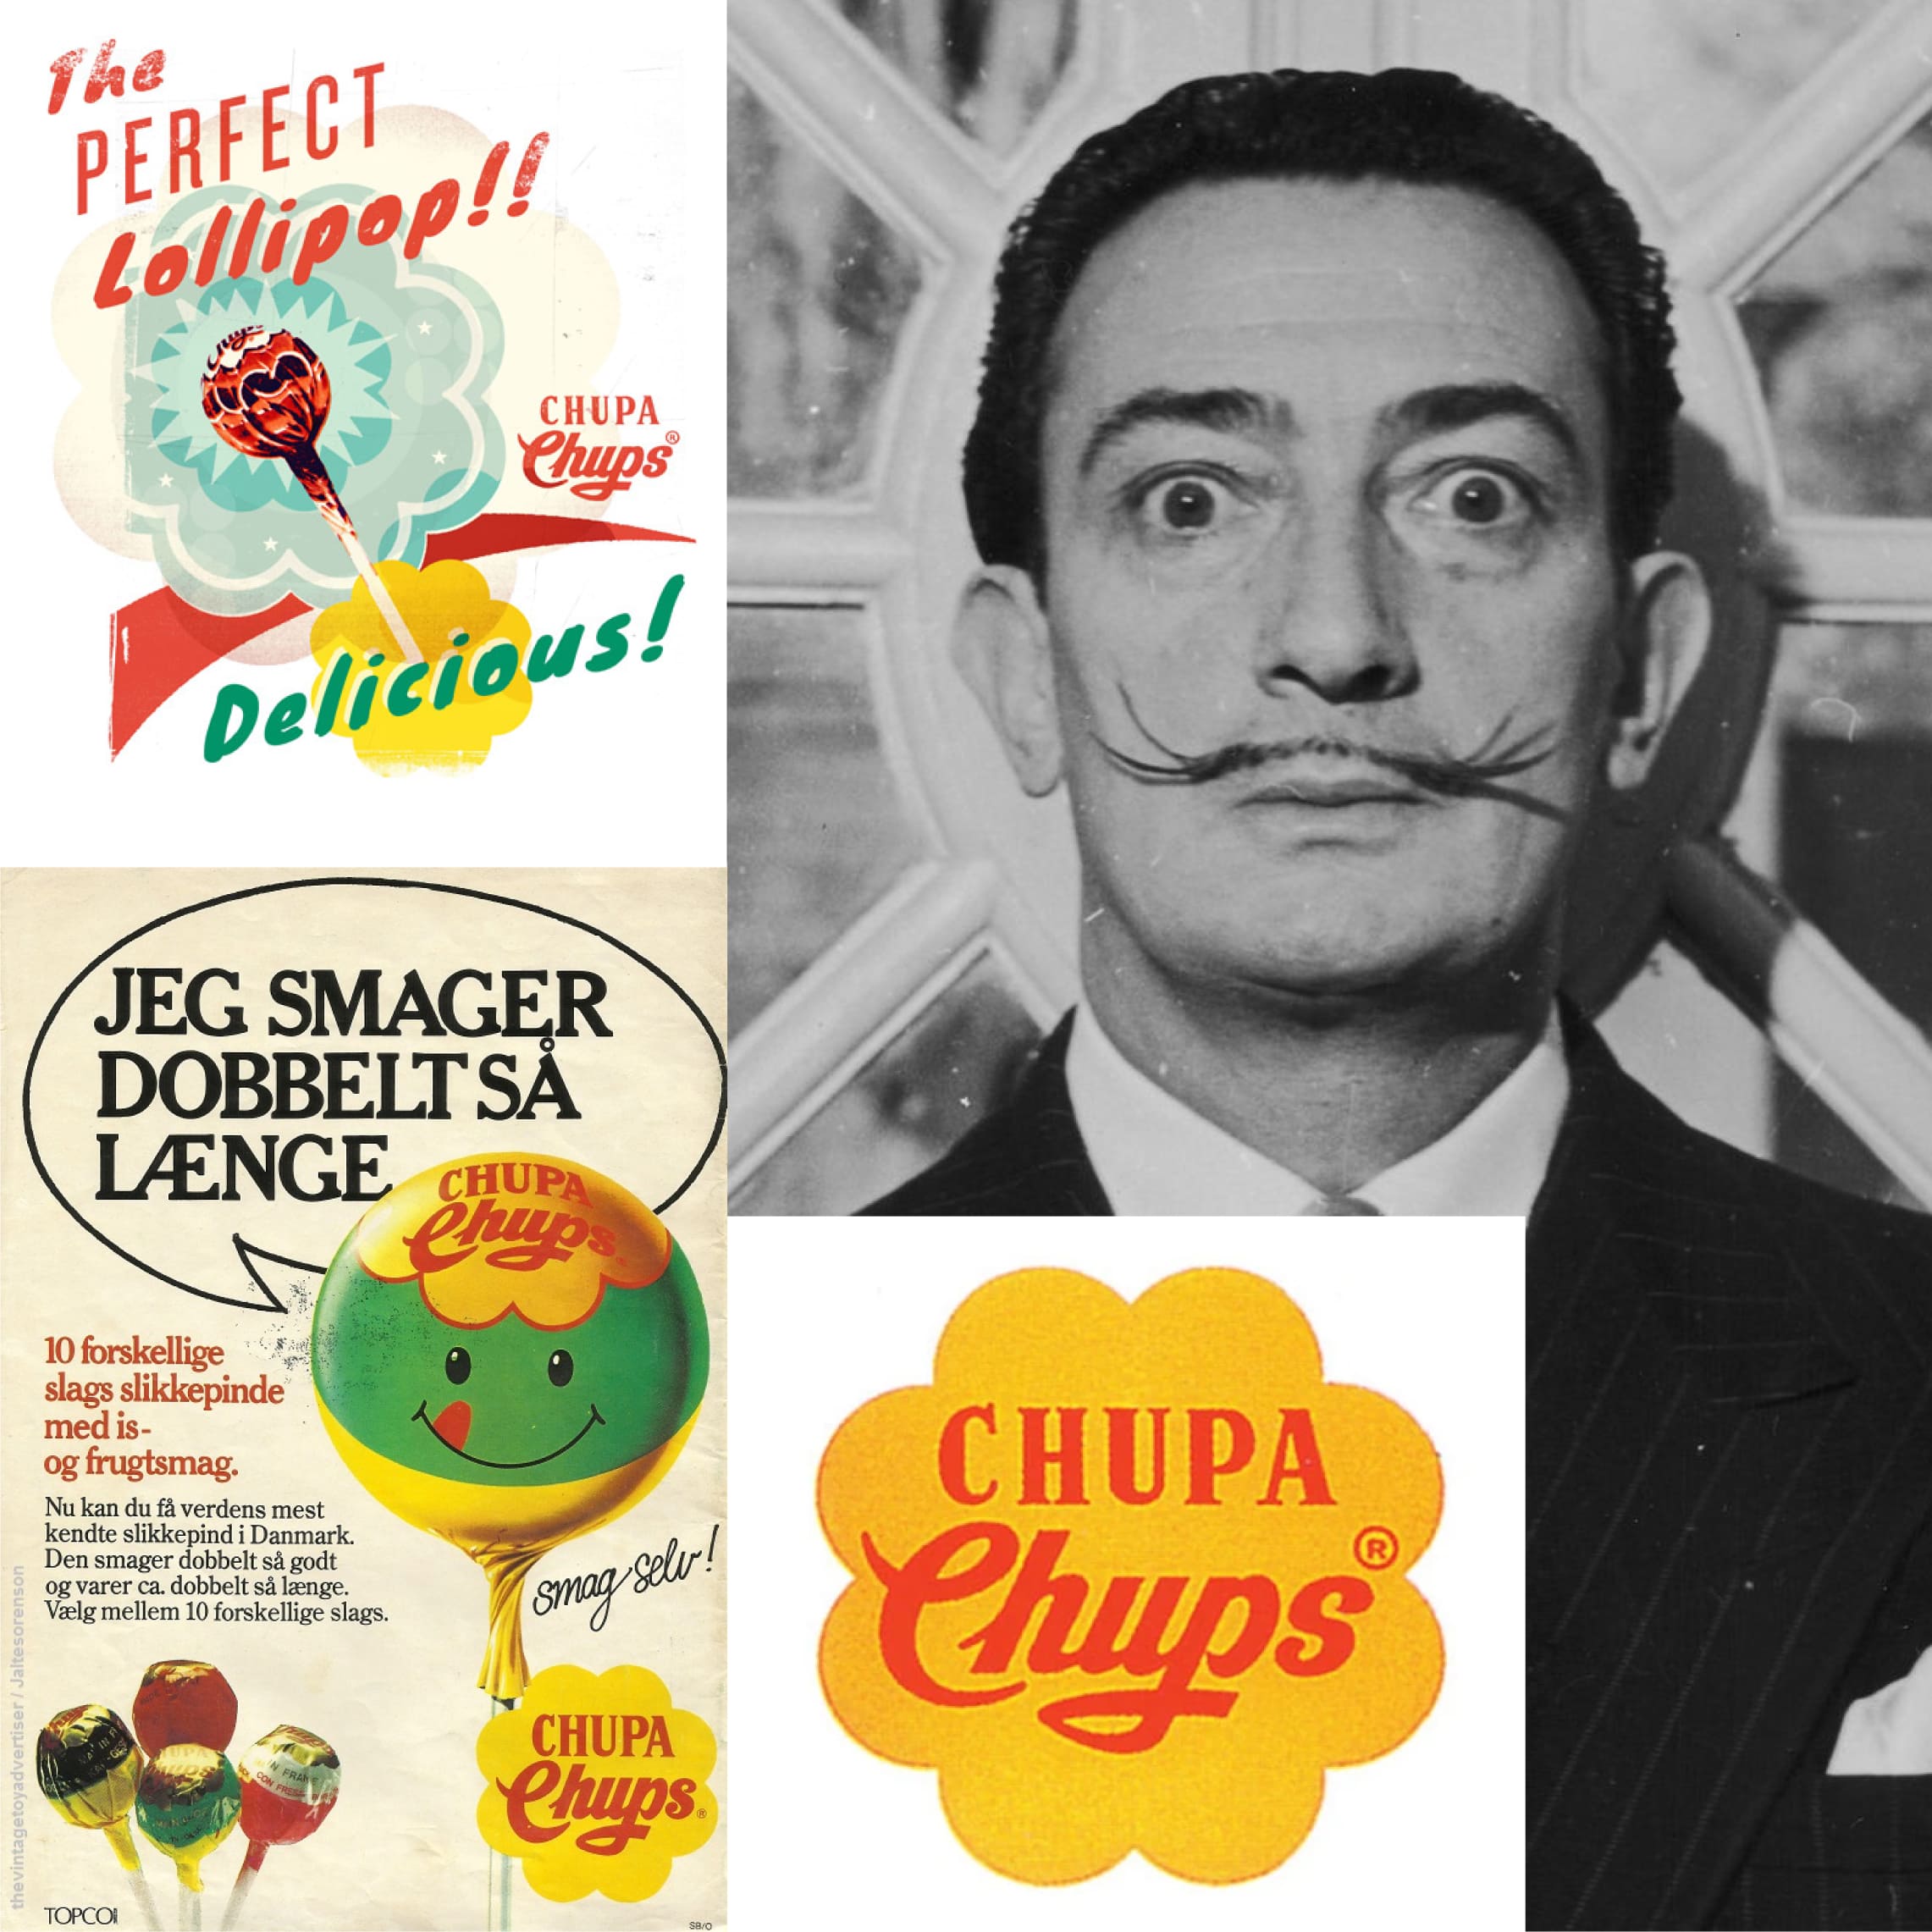 This is a collage of images related to Chupa Chups lollipops. On the top left, there is a vintage advertisement featuring the text "The PERFECT Lollipop!!" in bold, stylized lettering, with "Delicious!" written below. The Chupa Chups logo appears next to an illustrated lollipop. Below this, there's another advertisement in Danish, reading "JEG SMAGER DOBBELT SÅ LÆNGE," which translates to "I taste twice as long." It shows a cartoonish, smiling lollipop character and text highlighting ten different flavors. On the right side, there is a black-and-white photo of surrealist artist Salvador Dalí with his iconic mustache, looking directly at the camera. Lastly, the bottom right displays the Chupa Chups logo in its well-known flower shape with the brand name in the center. The colors in the images are a mix of vibrant and grayscale tones.